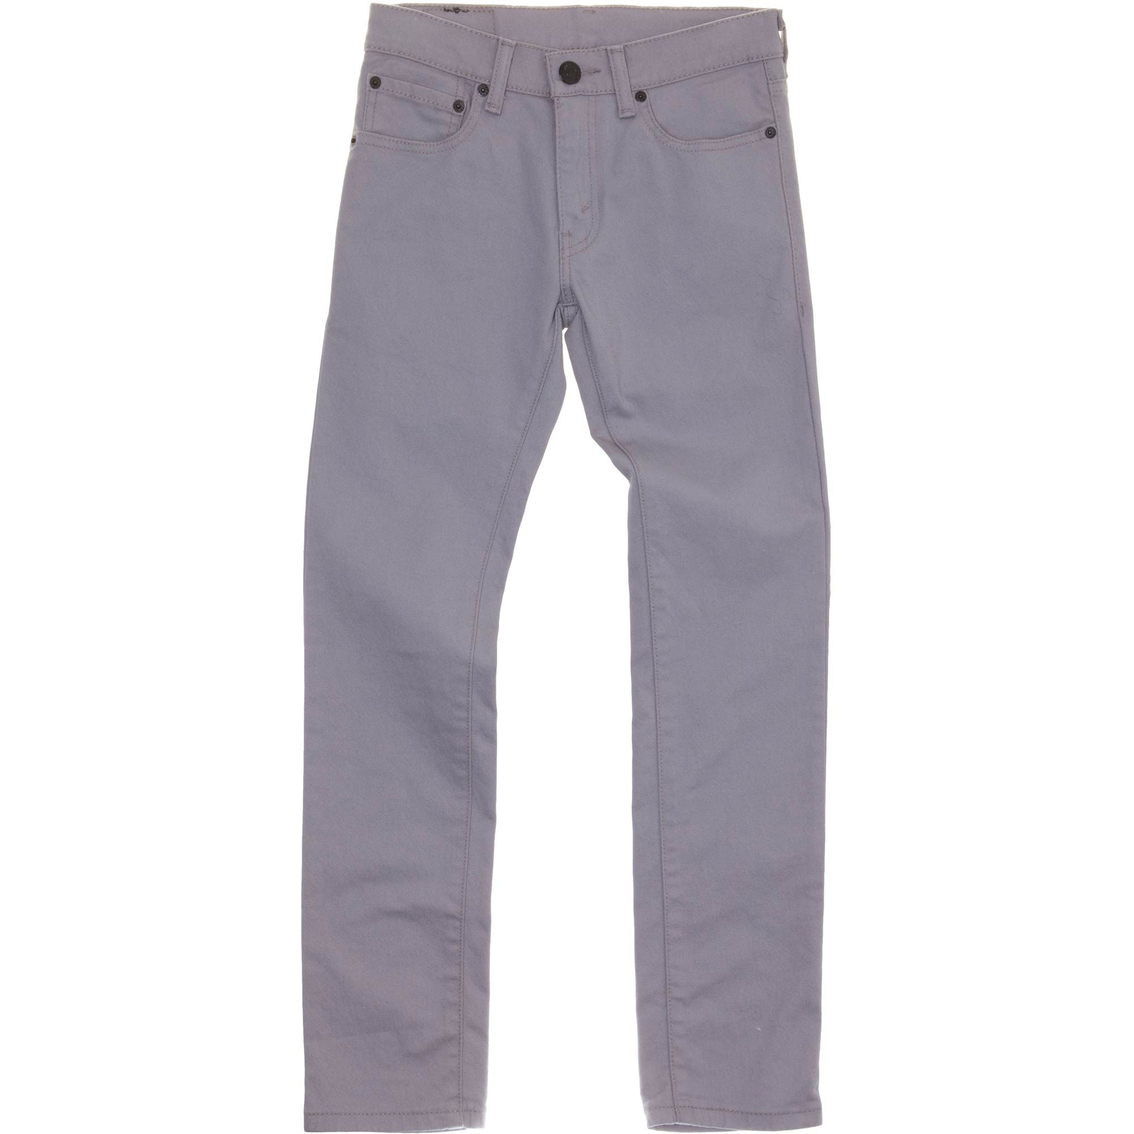 Levi's Boys 510 Super Skinny Jeans | Boys 8-20 | Clothing & Accessories |  Shop The Exchange